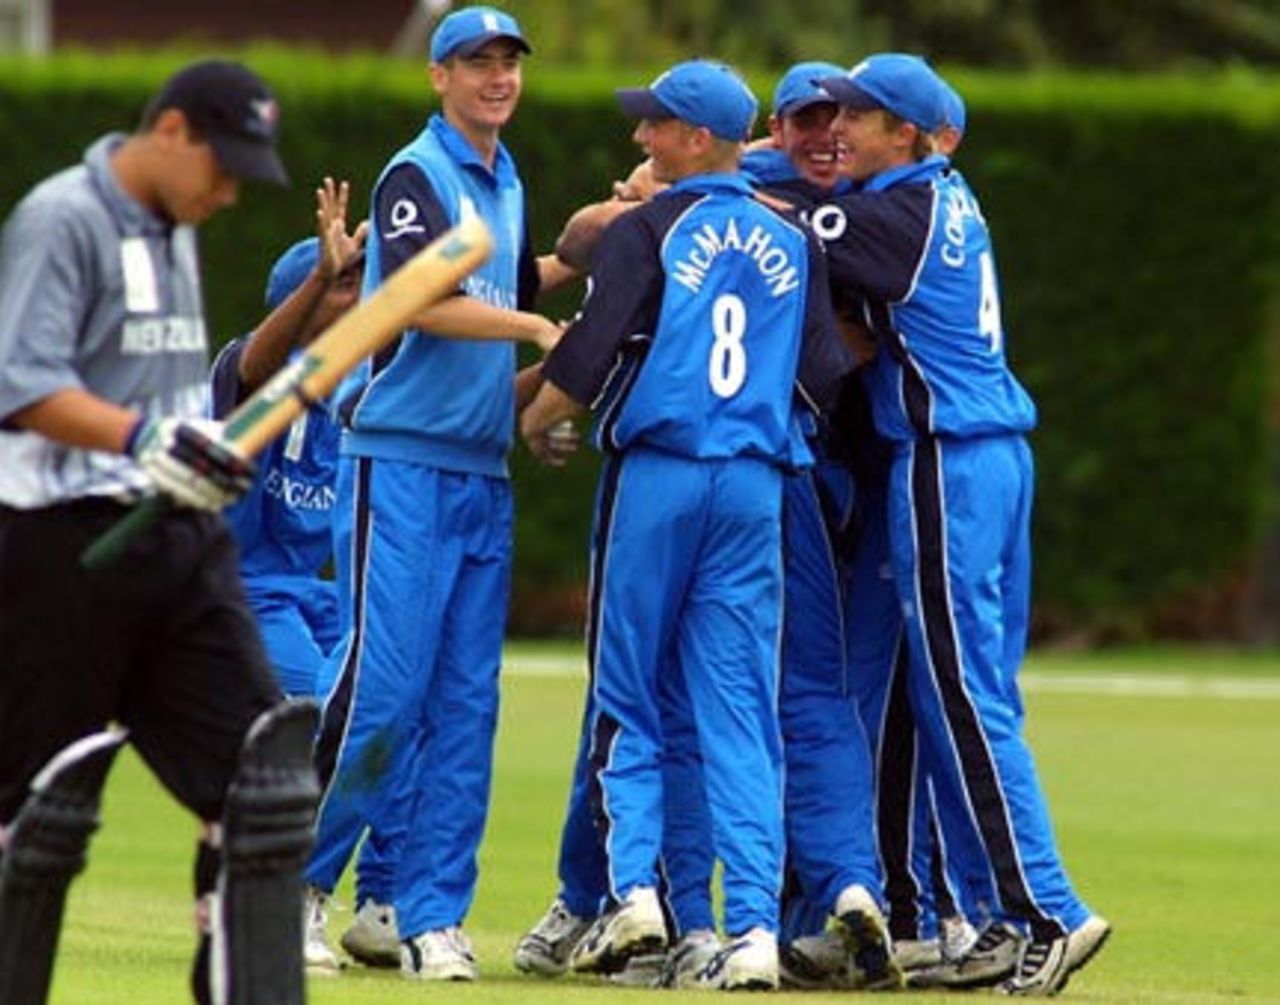 New Zealand Under-19 batsman Ross Taylor (left) walks from the field as England Under-19 players celebrate his dismissal, caught by Nicky Peng from the bowling of Gordon Muchall for one. ICC Under-19 World Cup Super League Group 2: England Under-19s v New Zealand Under-19s at Lincoln No. 3, Lincoln, 28 January 2002.